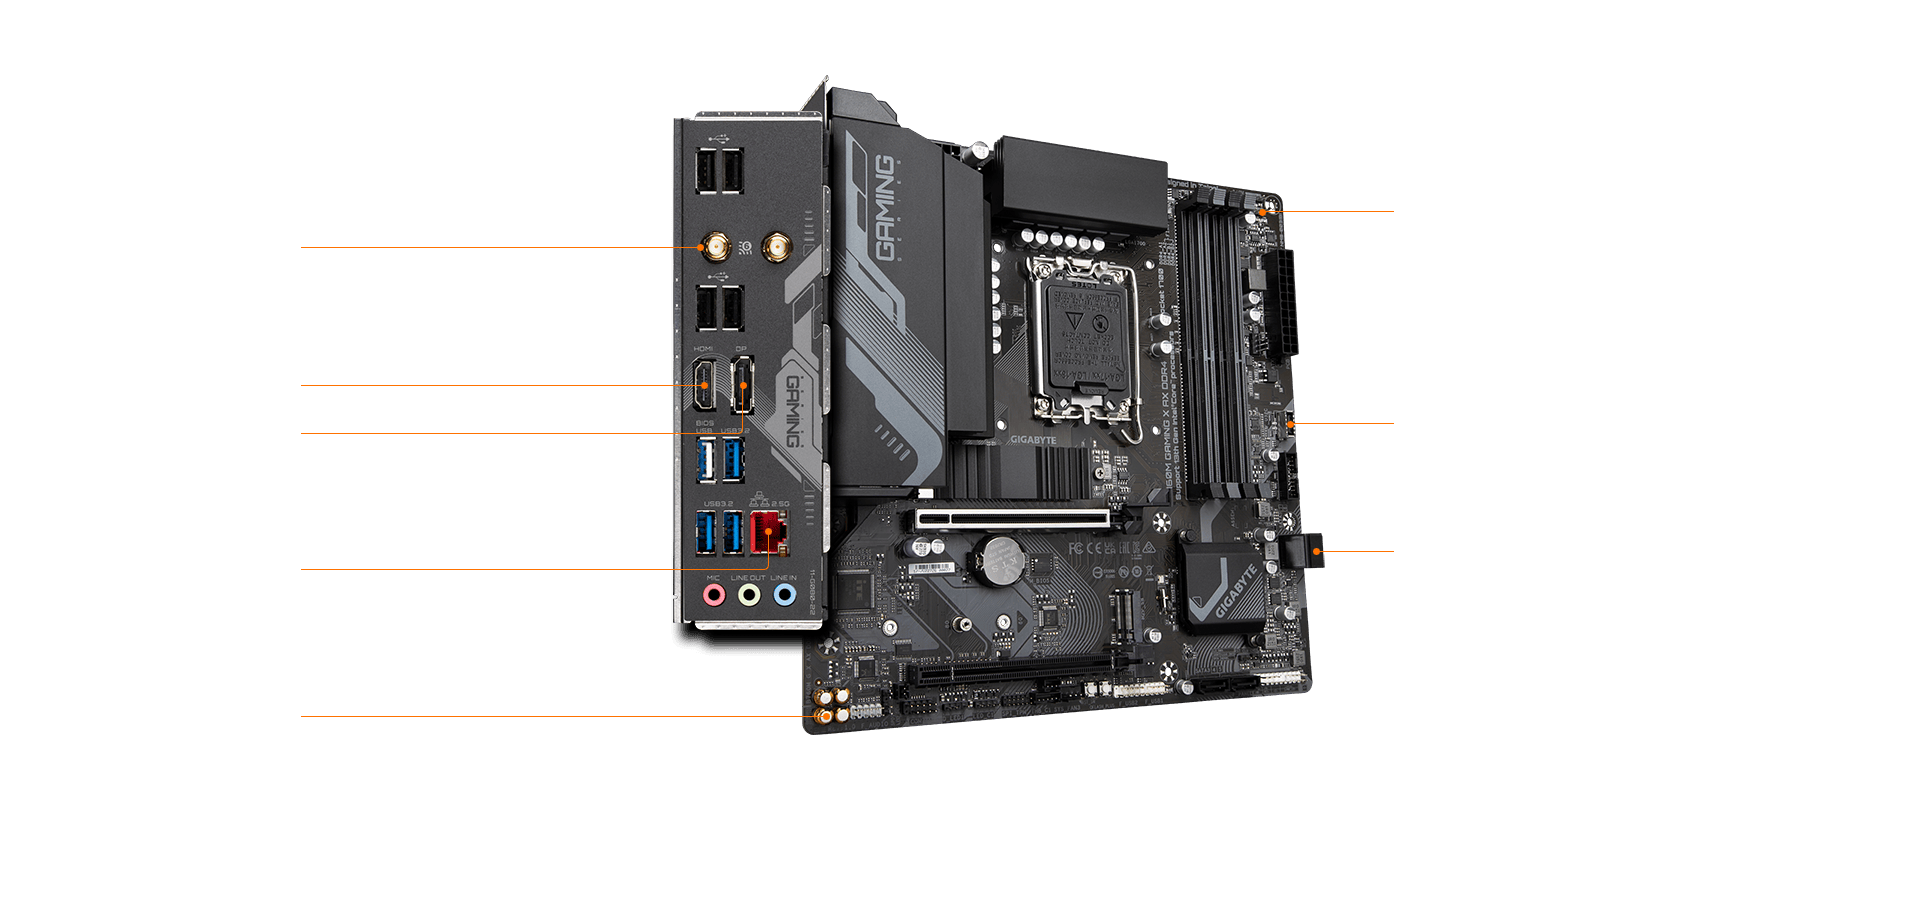 Intel B760 Motherboard for Gamers on a Budget? Gigabyte B760M GAMING X AX  DDR4 Unboxing & Overview 